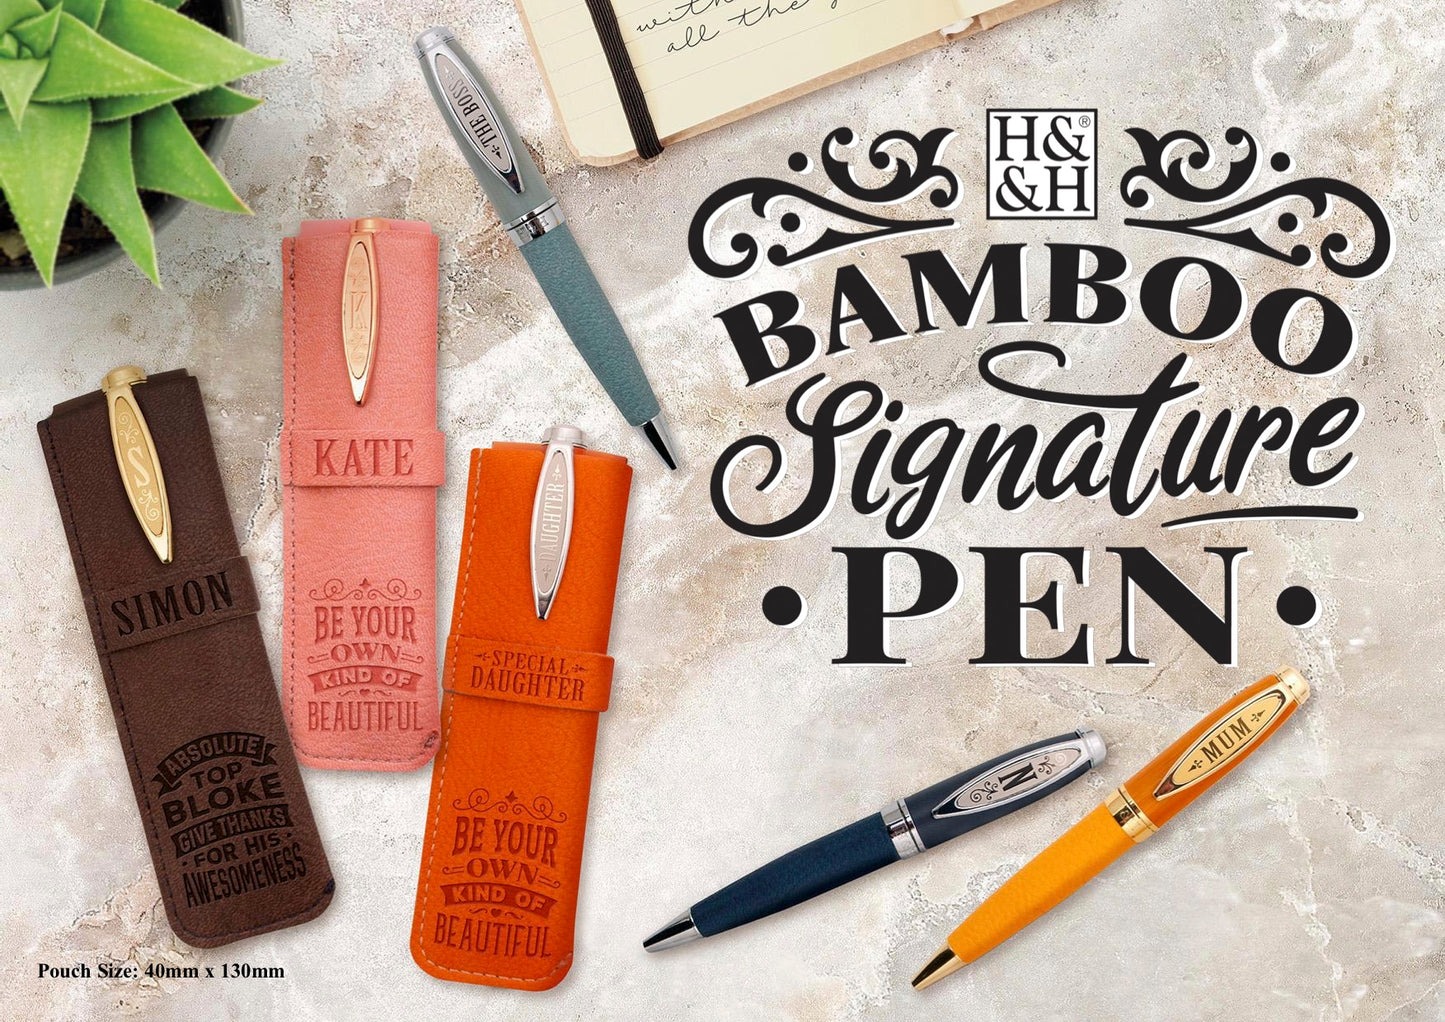 History & Heraldry Personalised Bamboo Signature Pens - Special Daughter